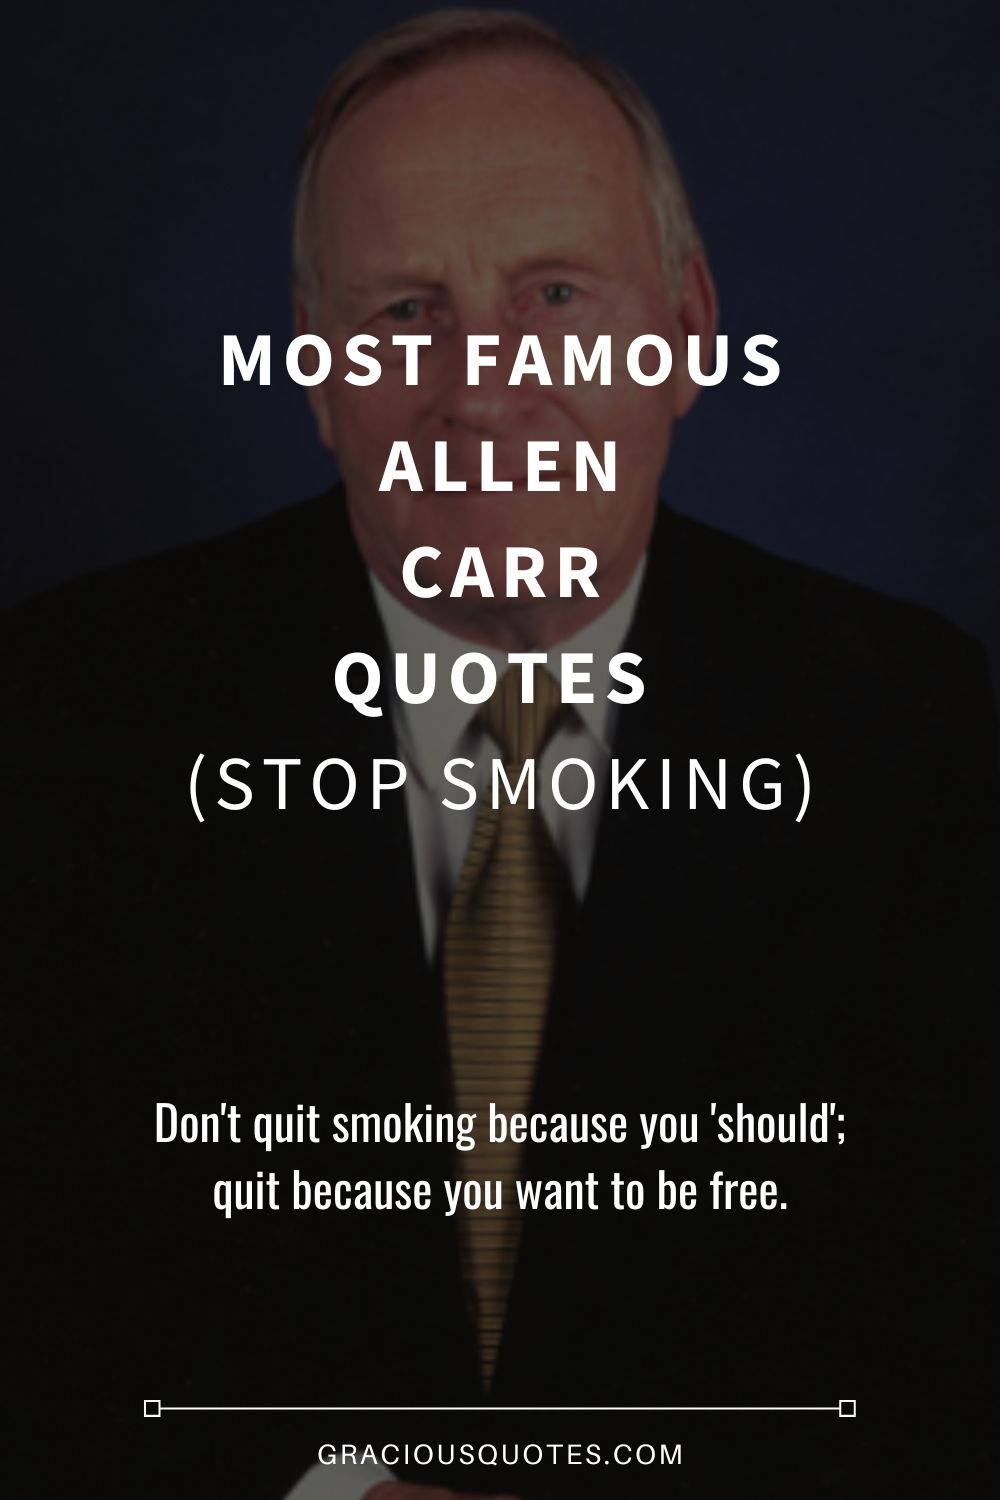 Most Famous Allen Carr Quotes (STOP SMOKING) - Gracious Quotes